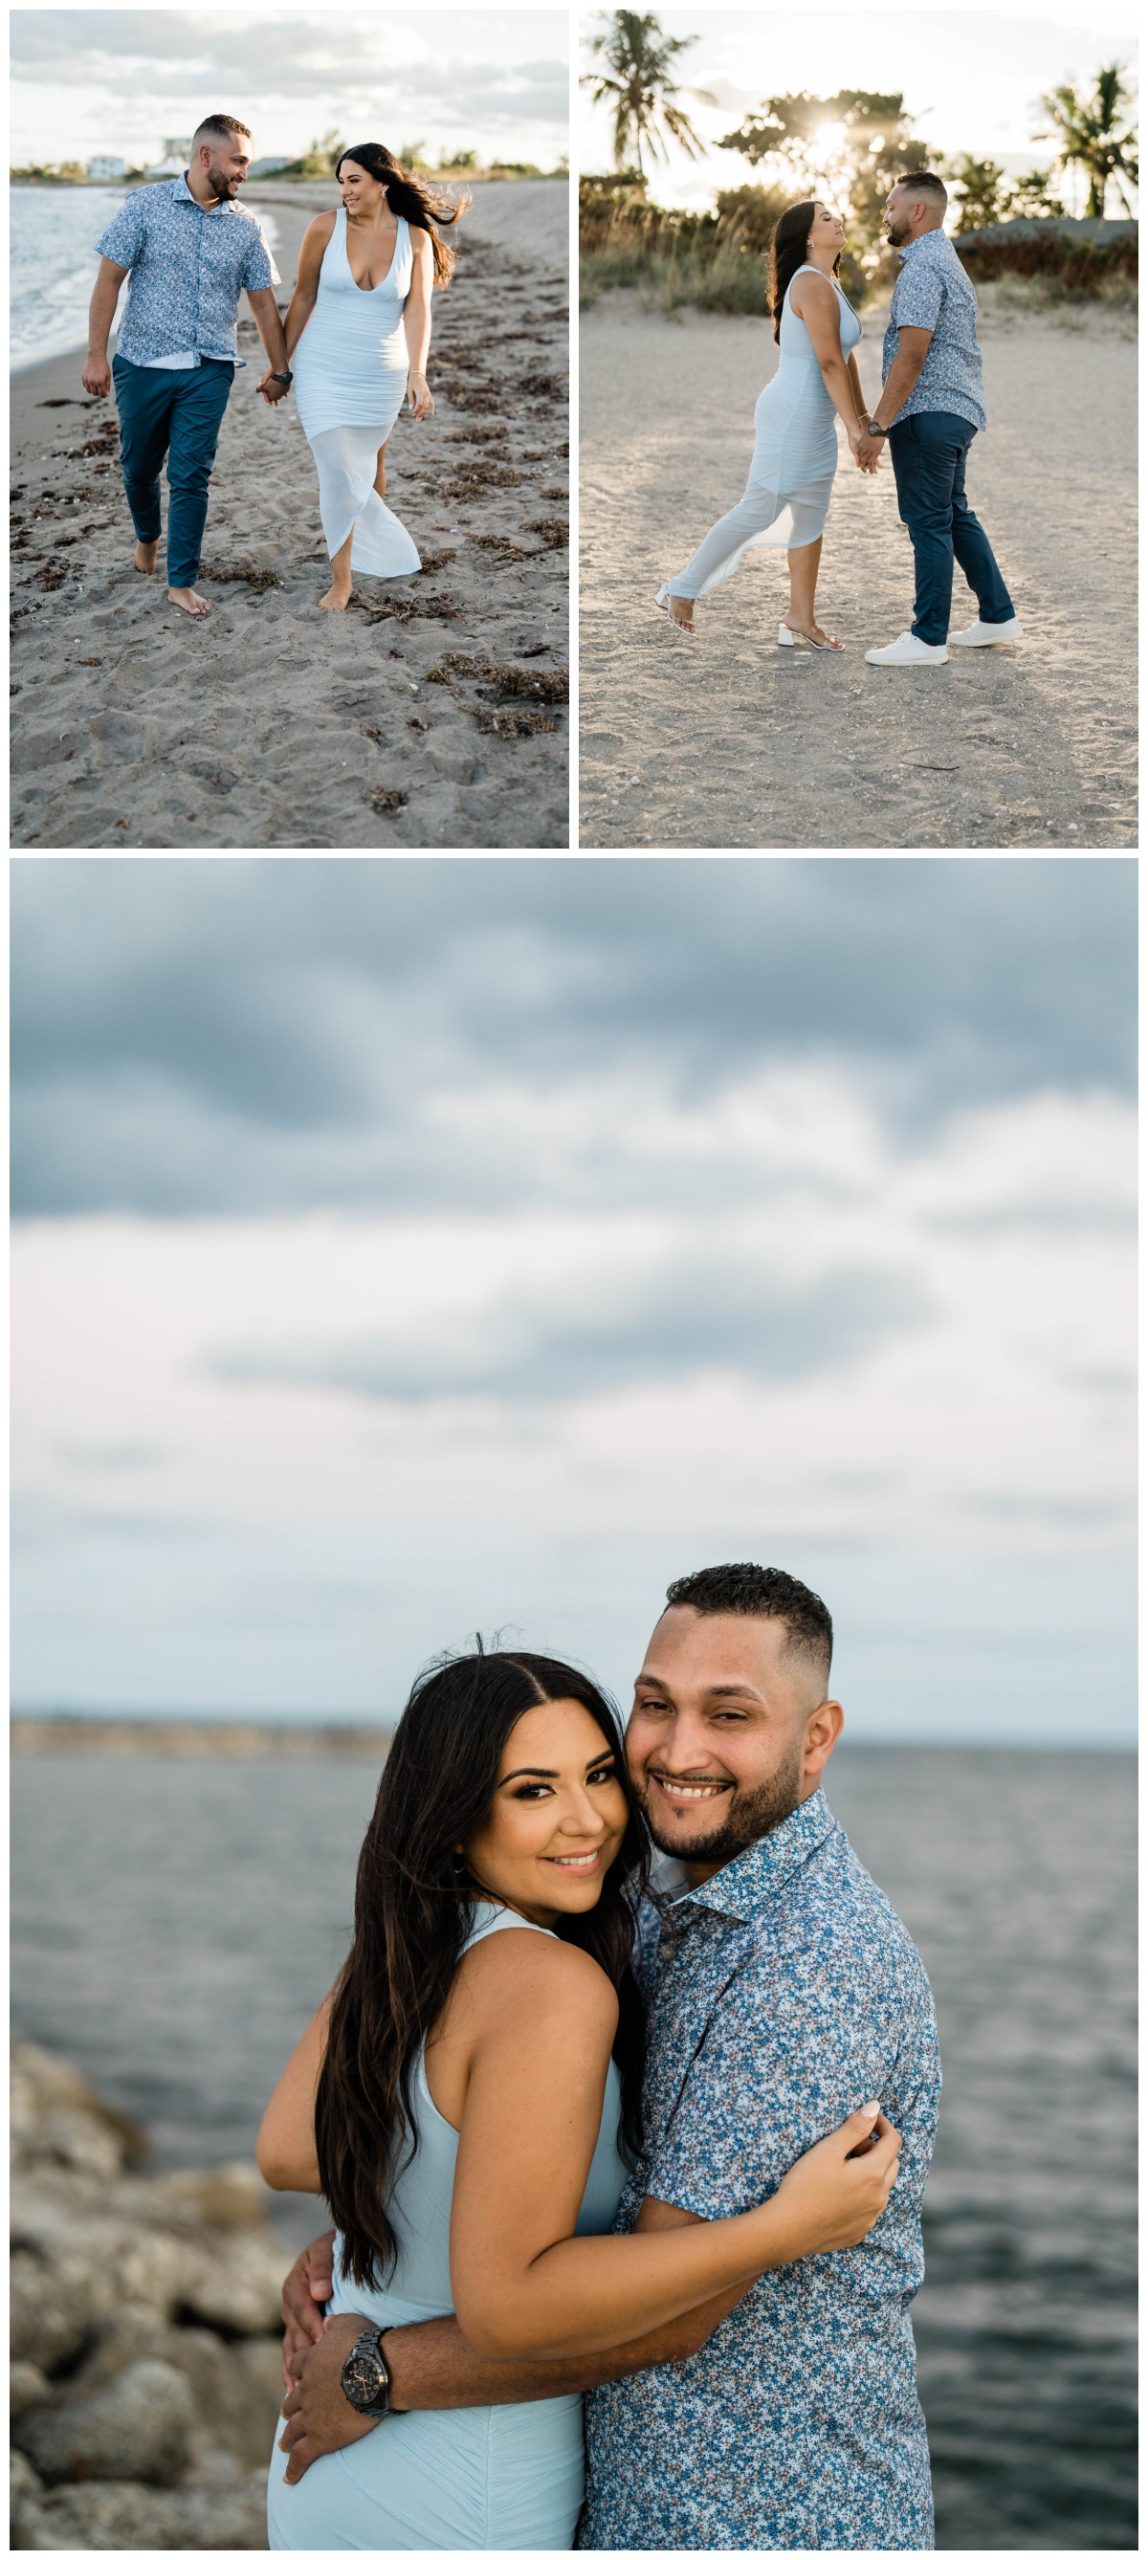 engaged couple smiles and embraces on the beach as Fort Pierce wedding photographer photographs them